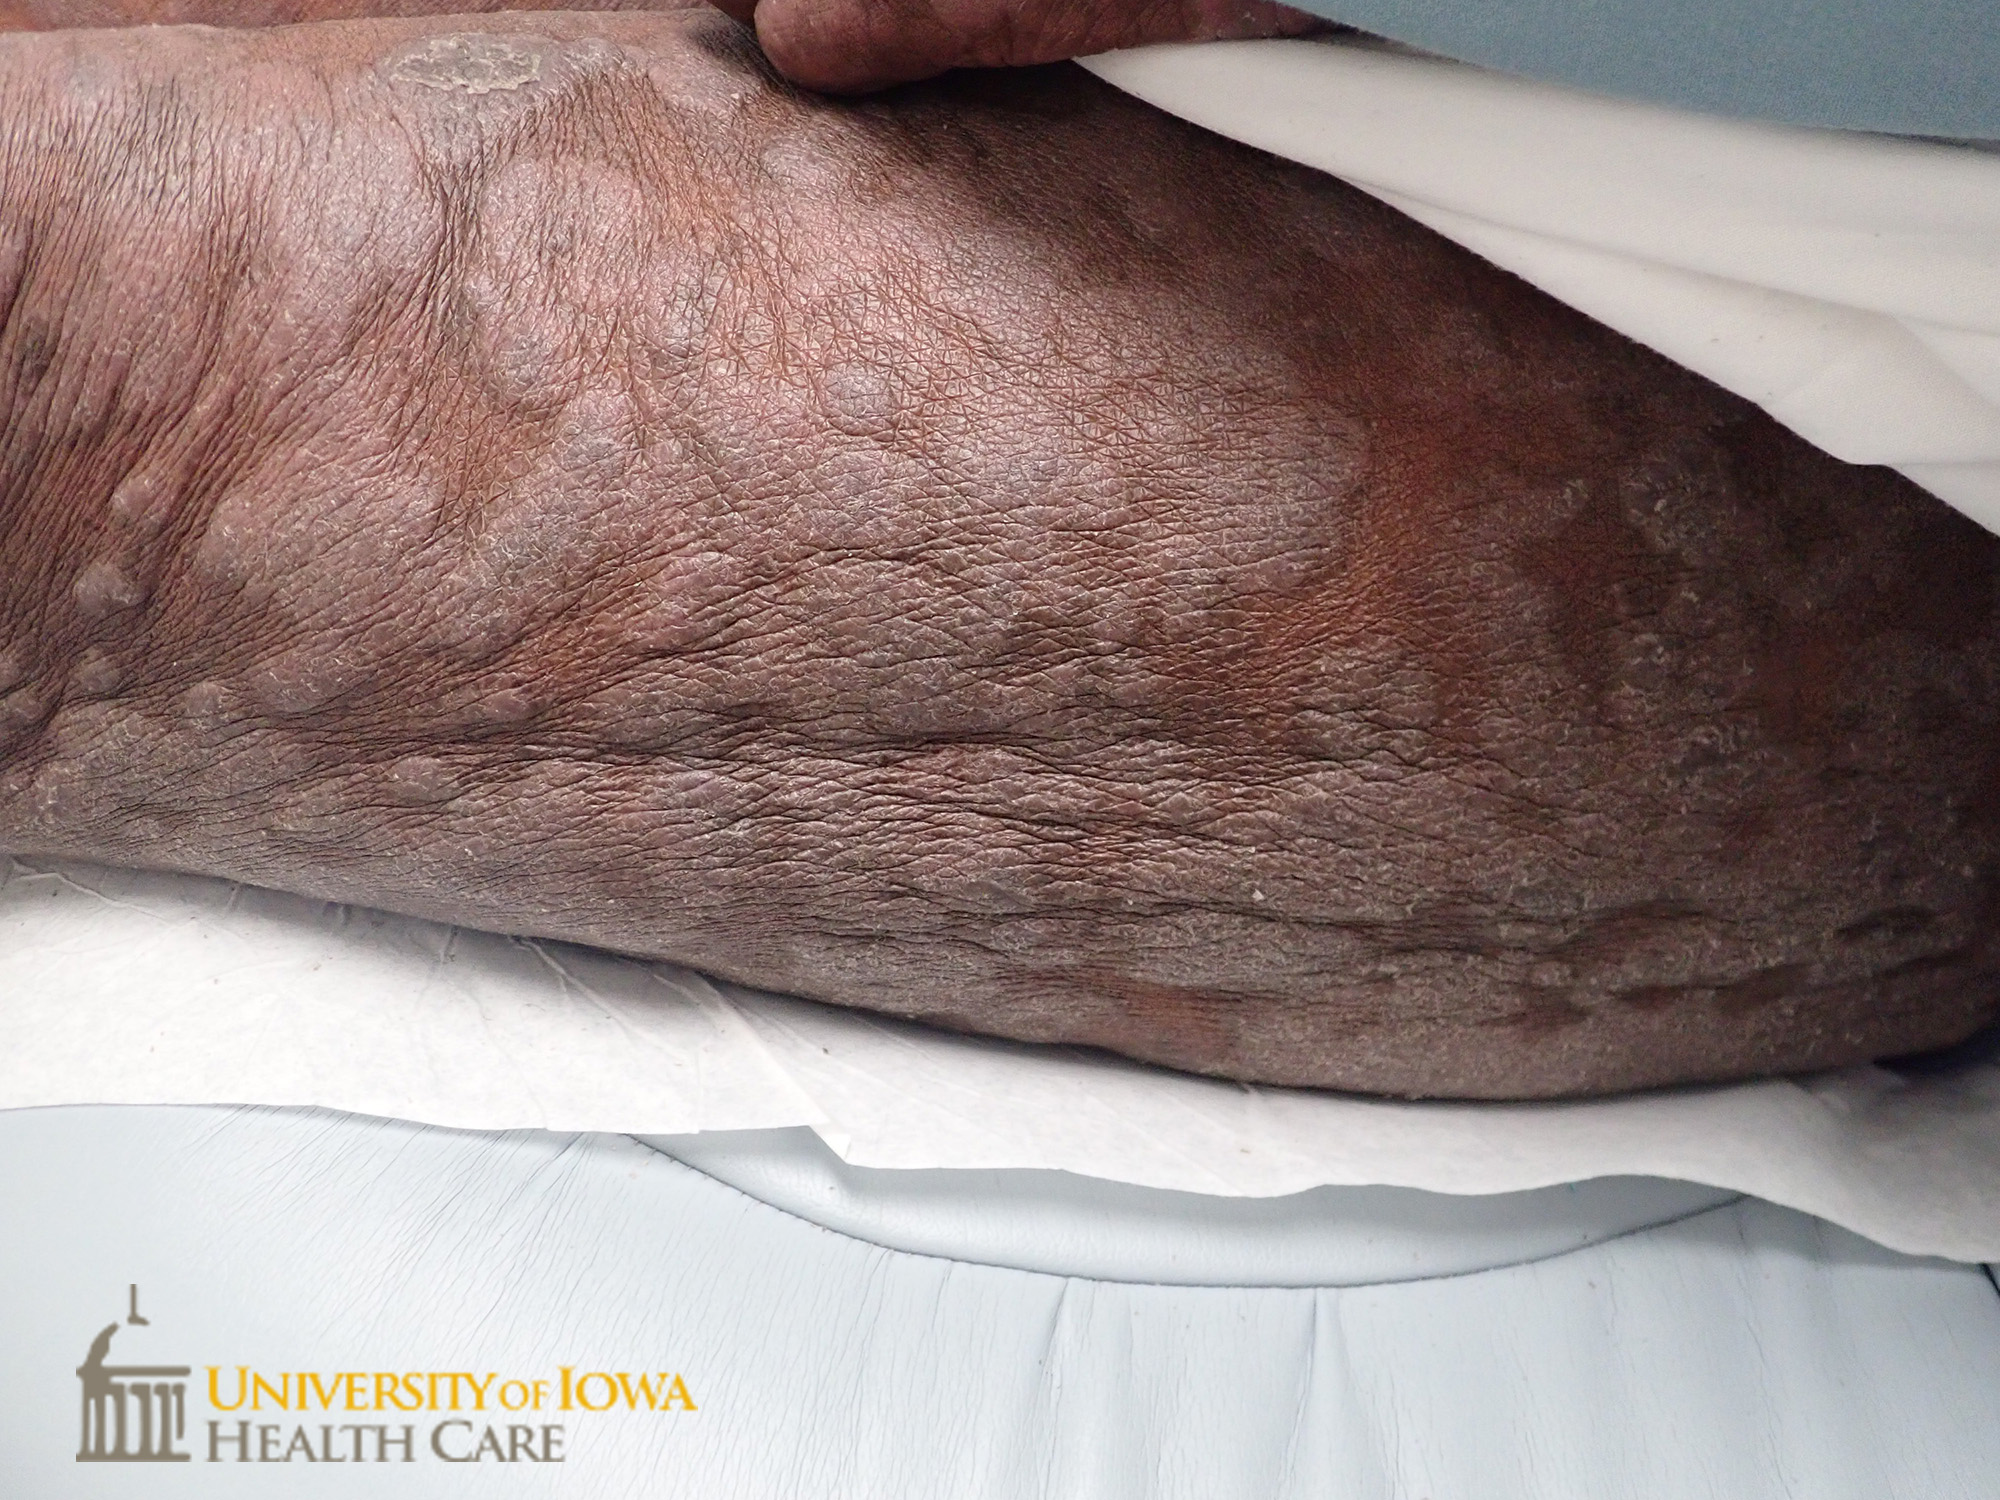 Pink to gray thick scaly plaques on the lower extremity. (click images for higher resolution).